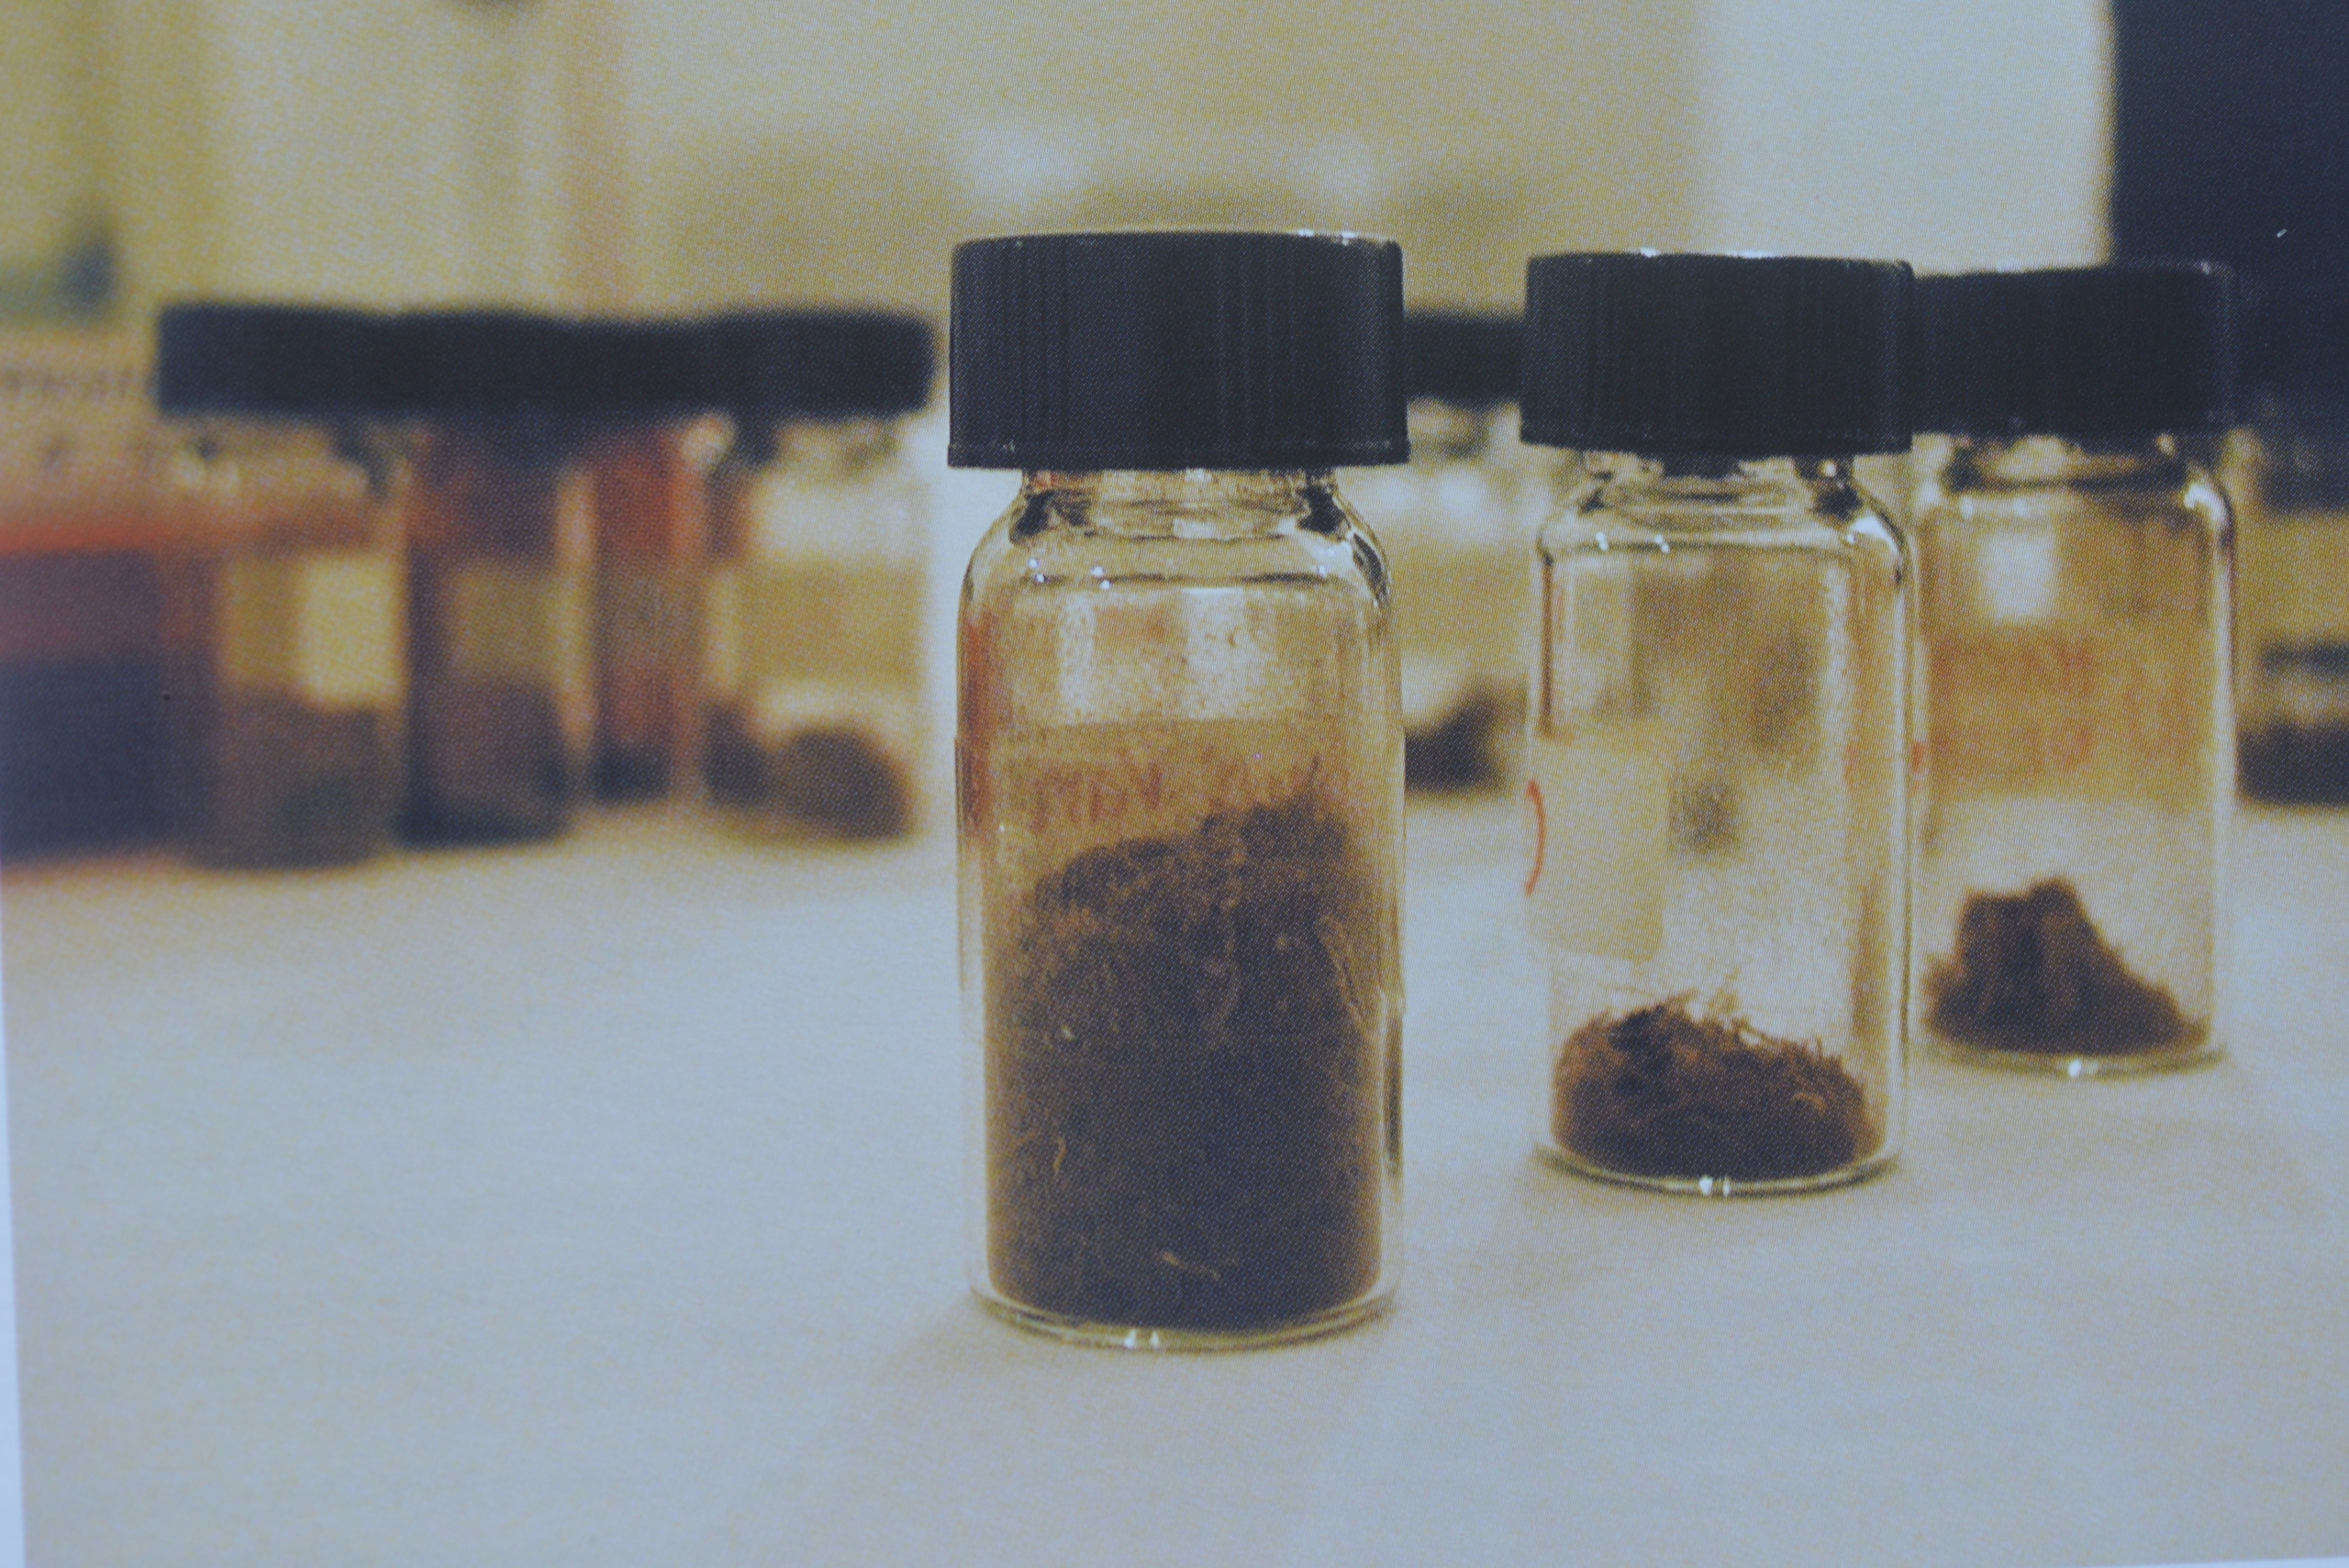 Photo C. Vials with charred materials